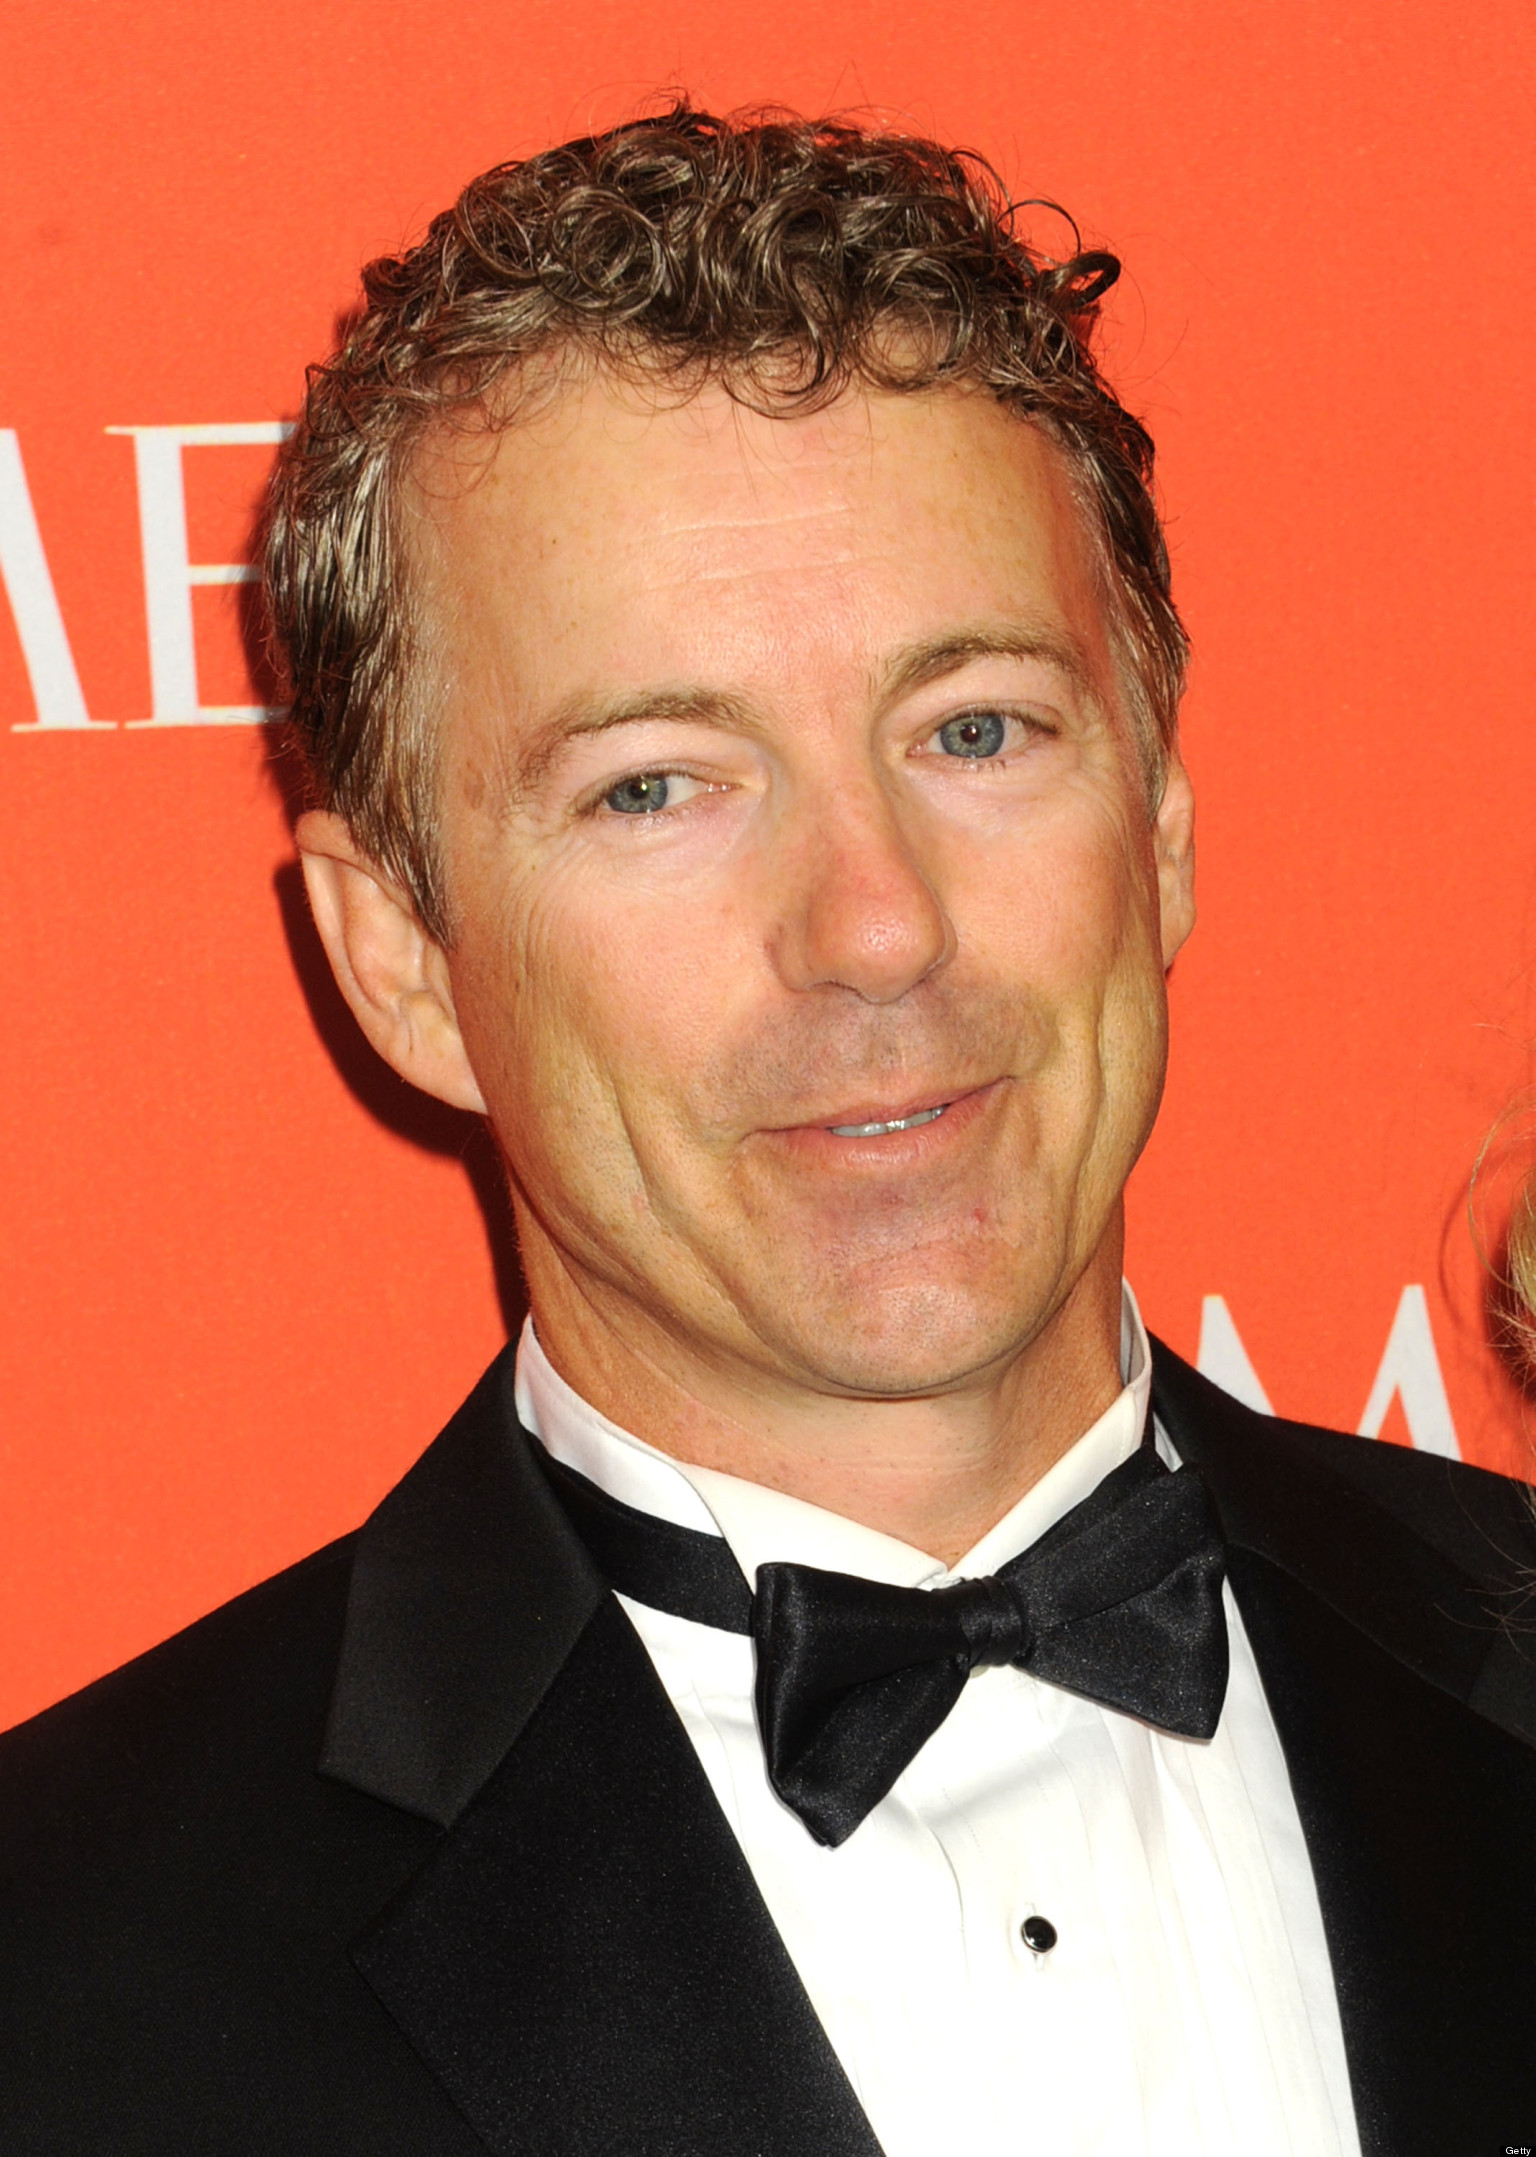 This Is The Rand Paul Moment | HuffPost1536 x 2157